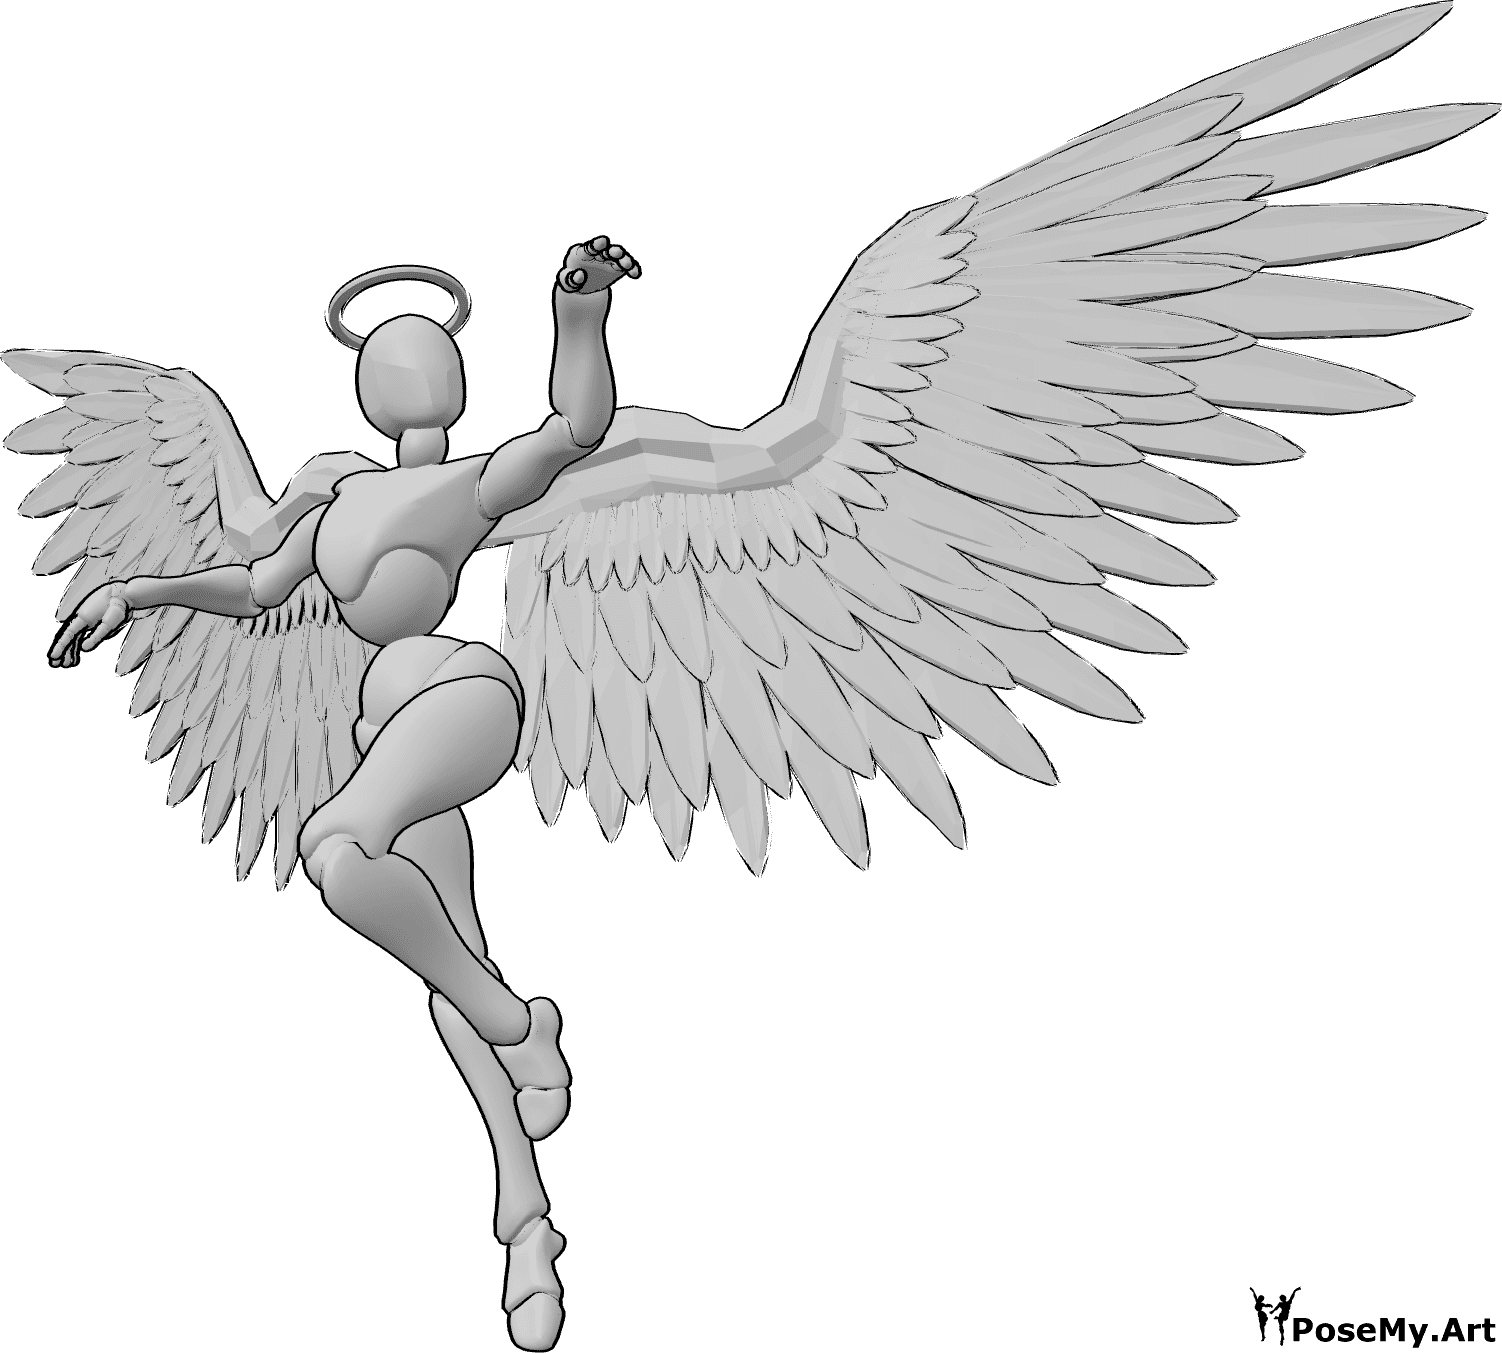 Pose Reference- Female angel dancing pose - Female angel is flying and dancing in the air, raising her hands and looking to the left